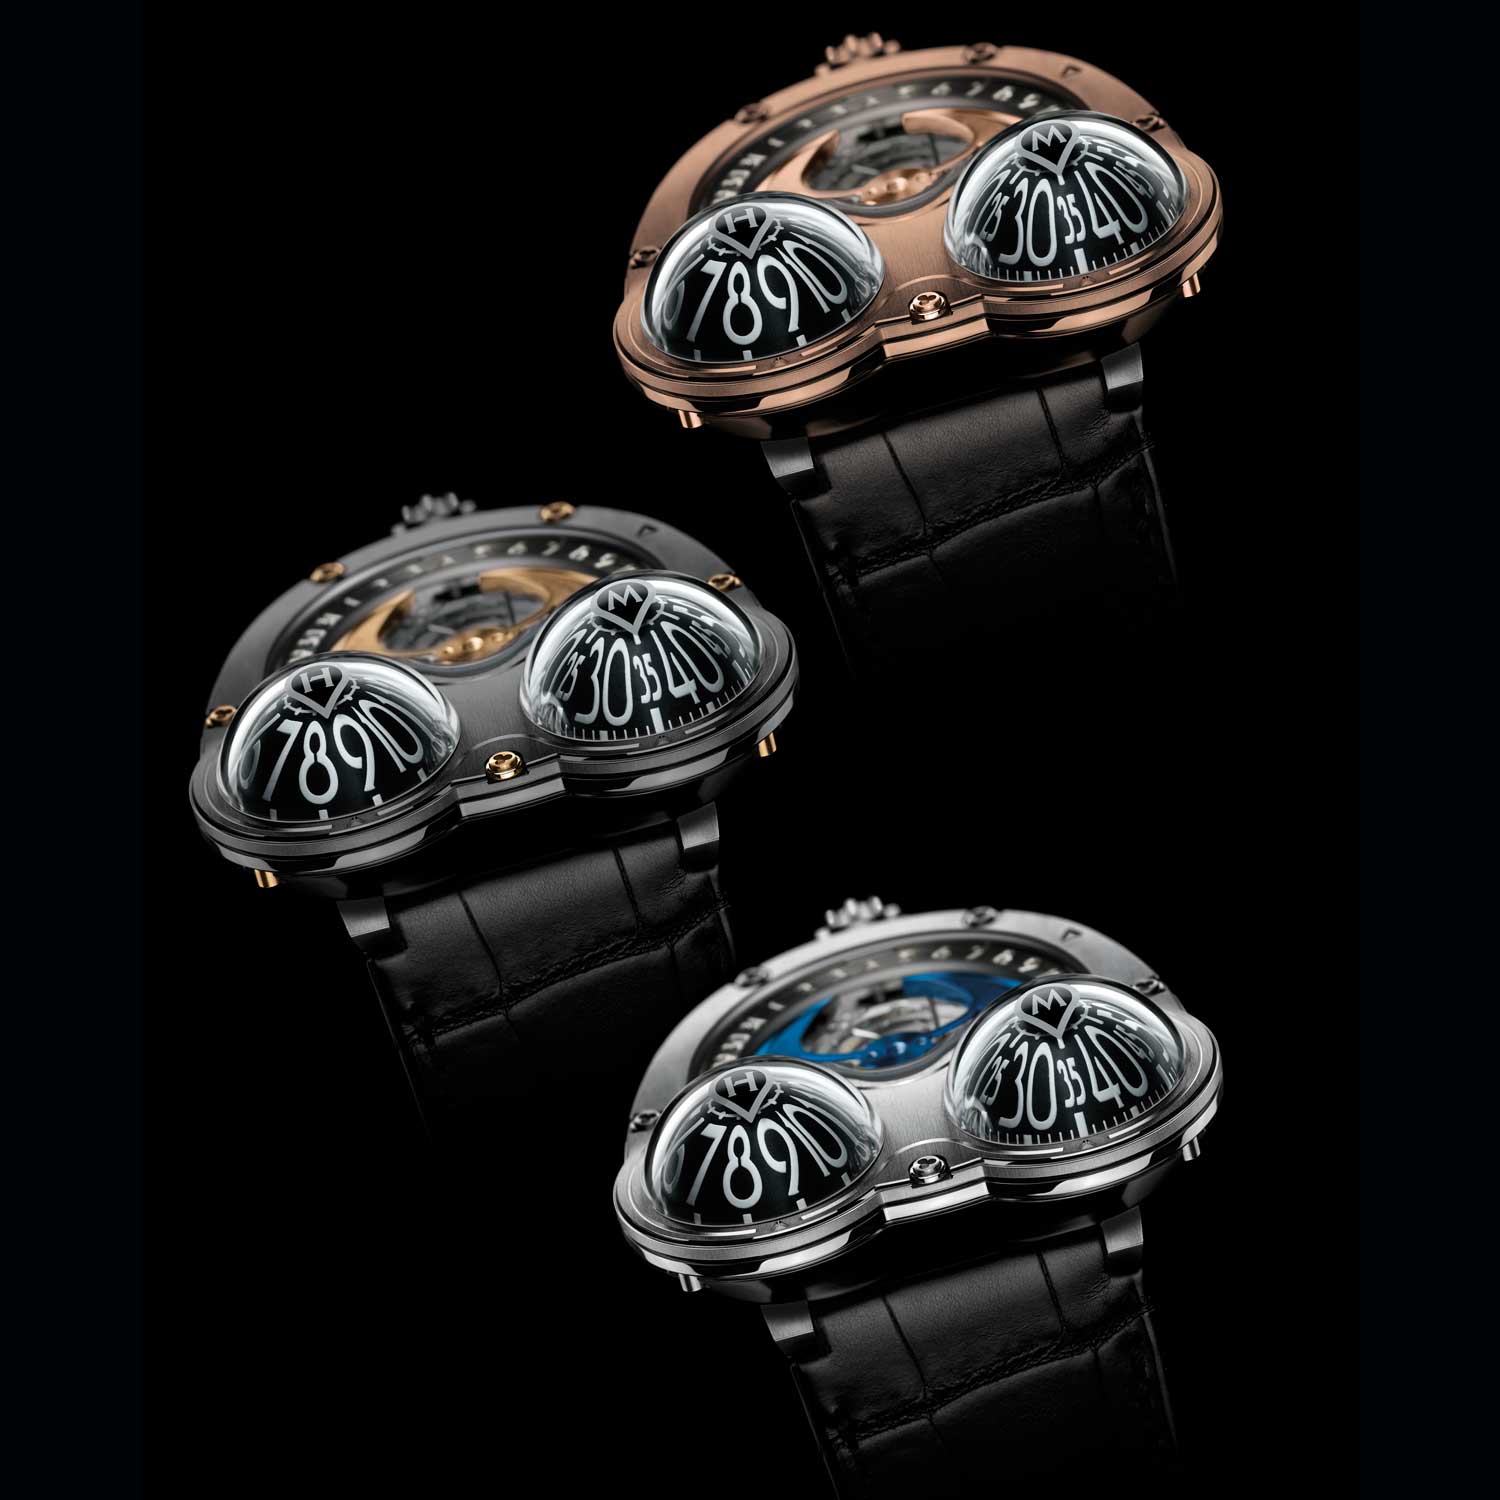 The HM3 Frog was introduced in 2010 and produced in three variations: the HM3 Frog Ti in Grade 5 titanium case and screws, the HM3 Poison Dart Frog in black PVD zirconium case, 18k yellow gold screws, limited edition of 10 pieces; the HM3 Fire Frog in 18k red gold and titanium case,18k red gold screws, limited edition of 10 pieces